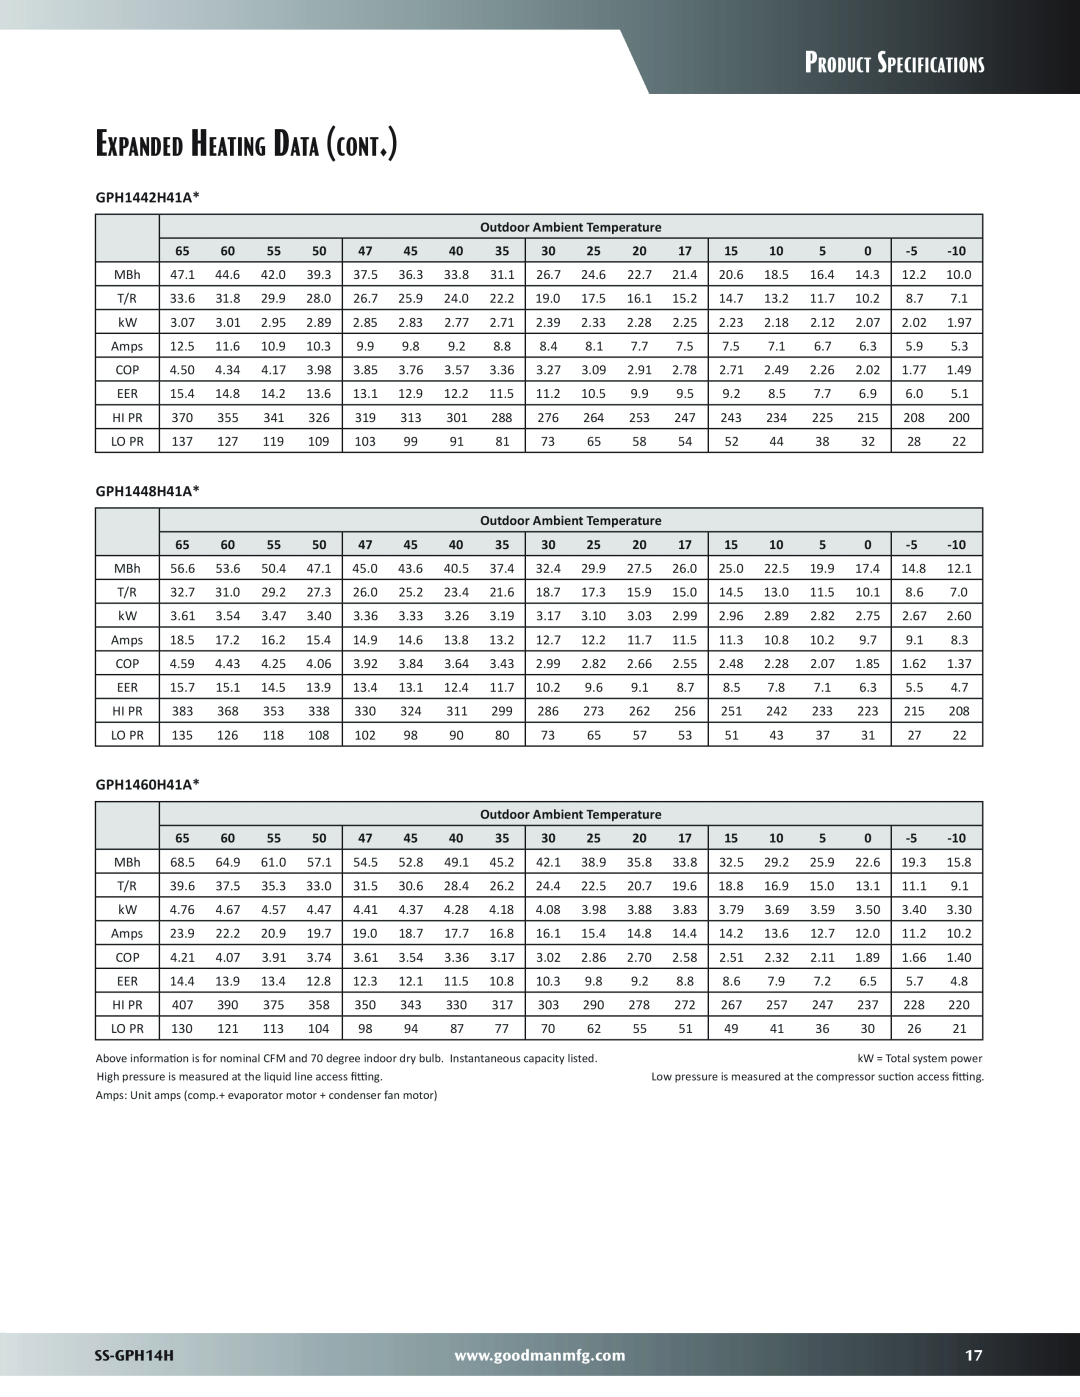 Goodman Mfg dimensions Expanded Heating Data cont, Product Specifications, SS-GPH14H 